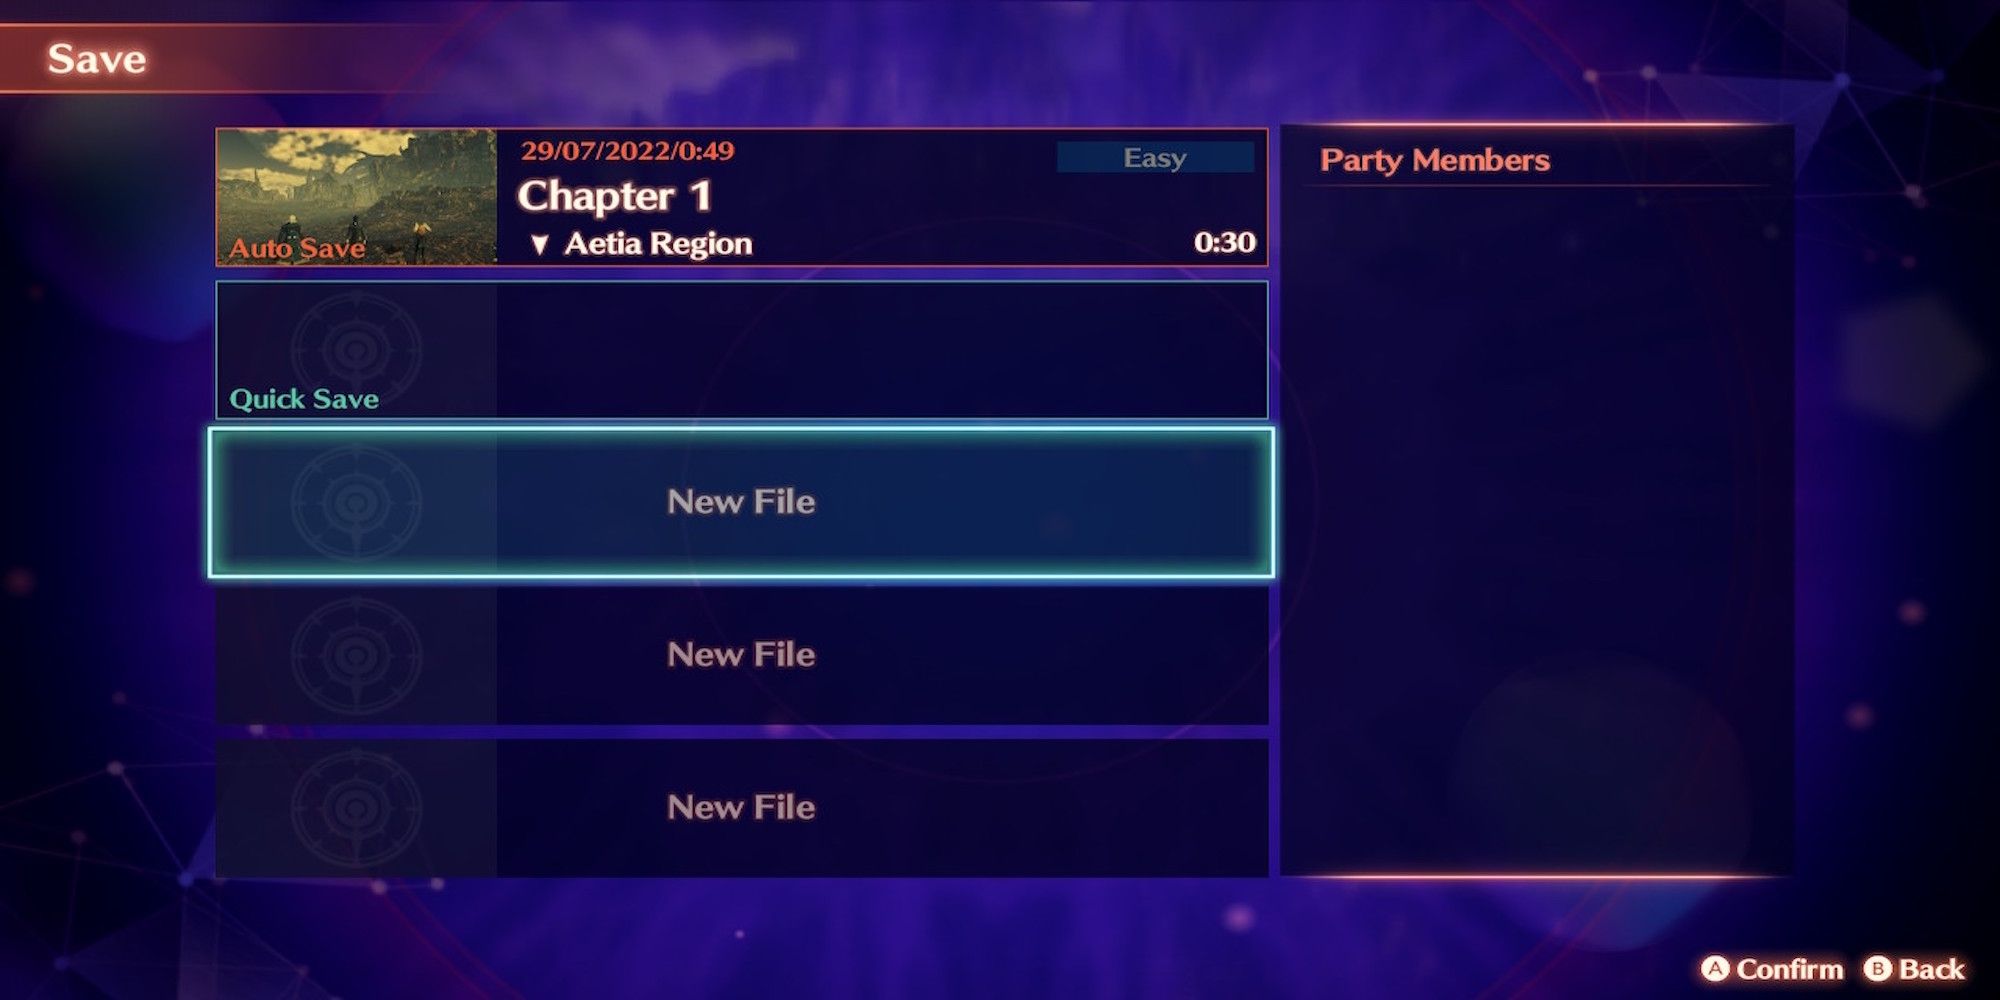 The save menu in Xenoblade Chronicles 3